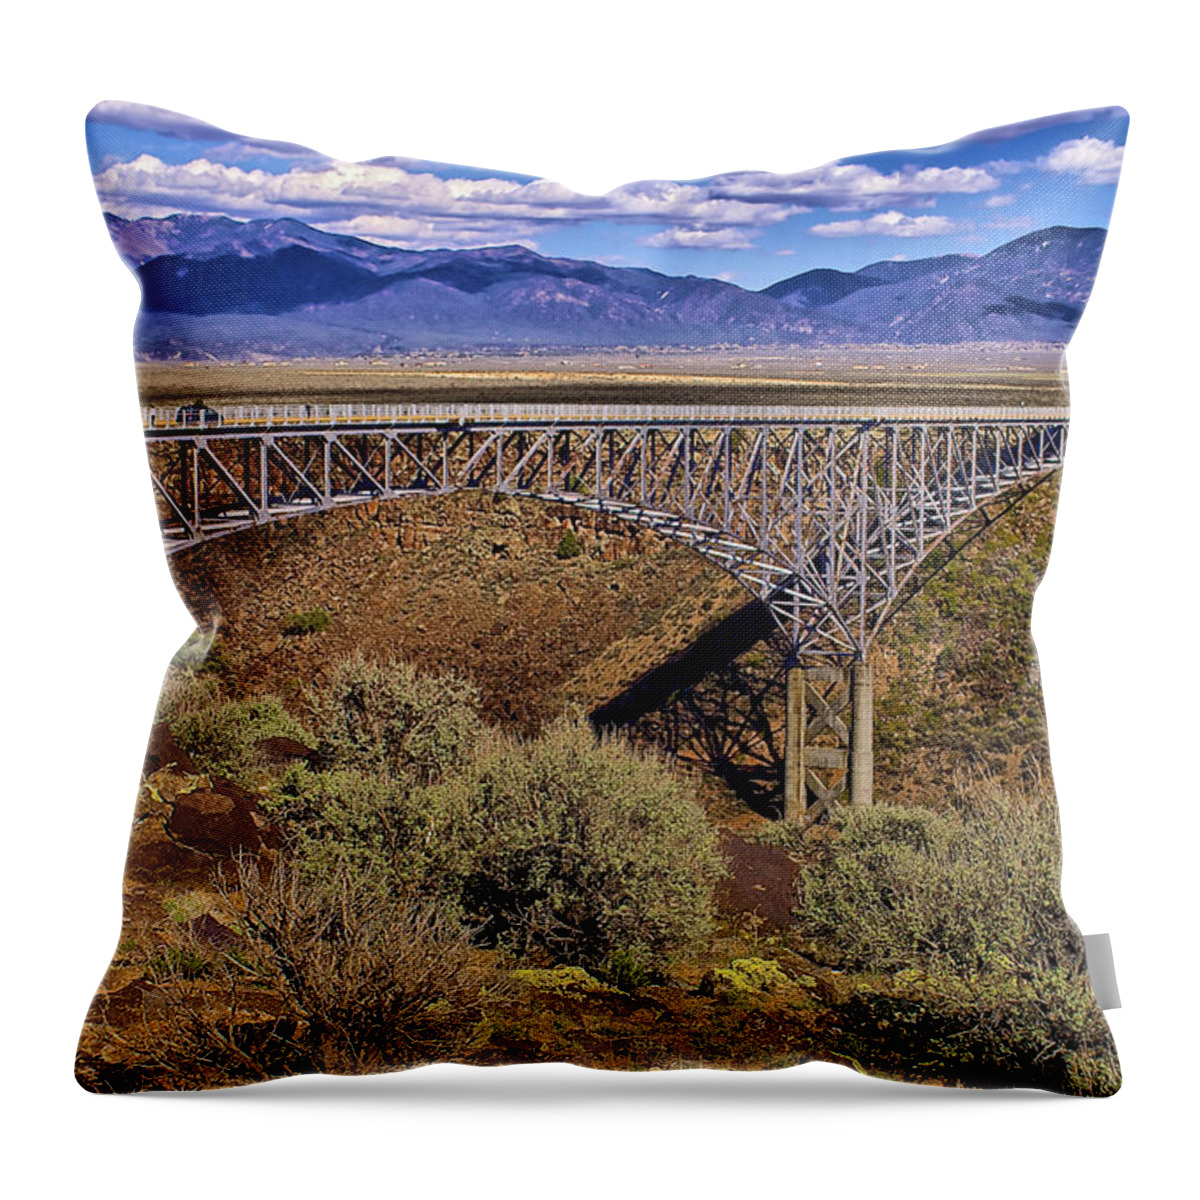 Architecture Throw Pillow featuring the photograph Rio Grand Gorge by Donald Pash